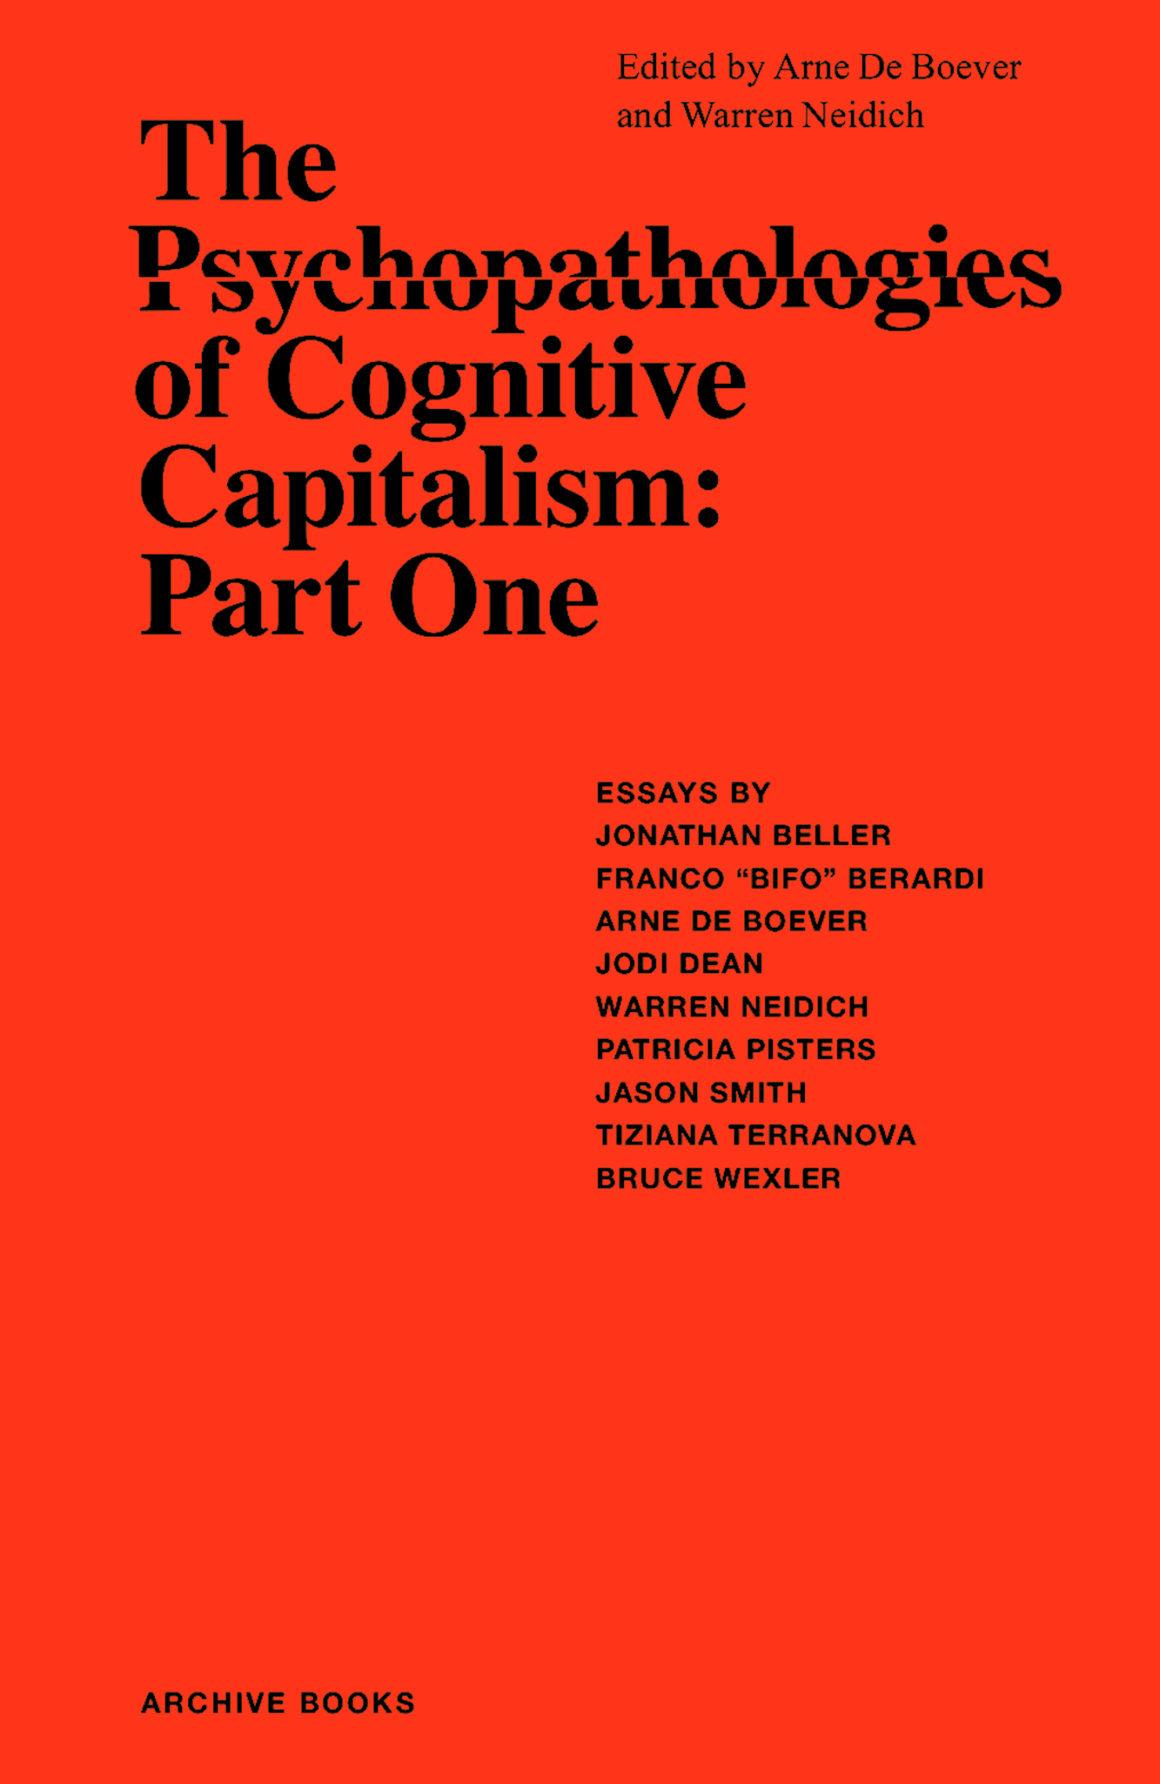 The Psychopathologies of Cognitive Capitalism. Part One